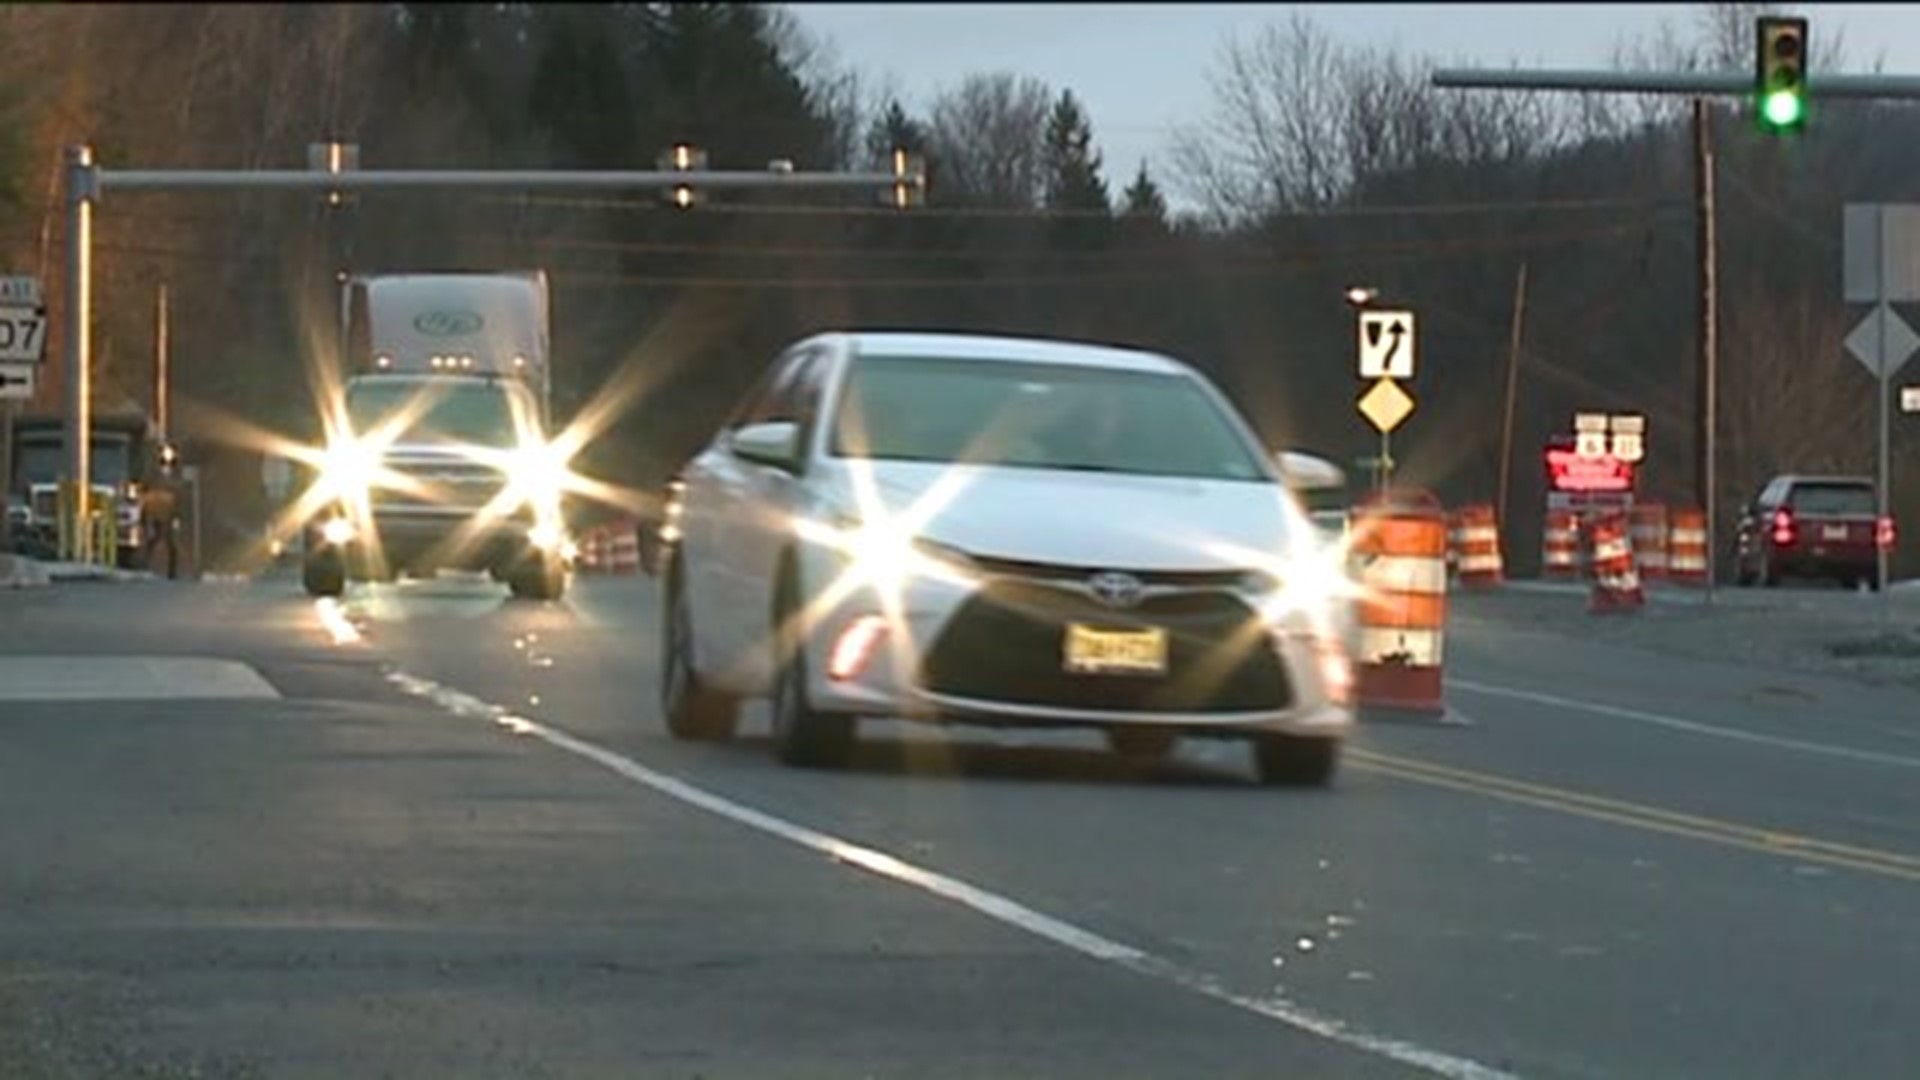 PennDOT: Routes 6/11 To Return To Two Lanes During The Winter